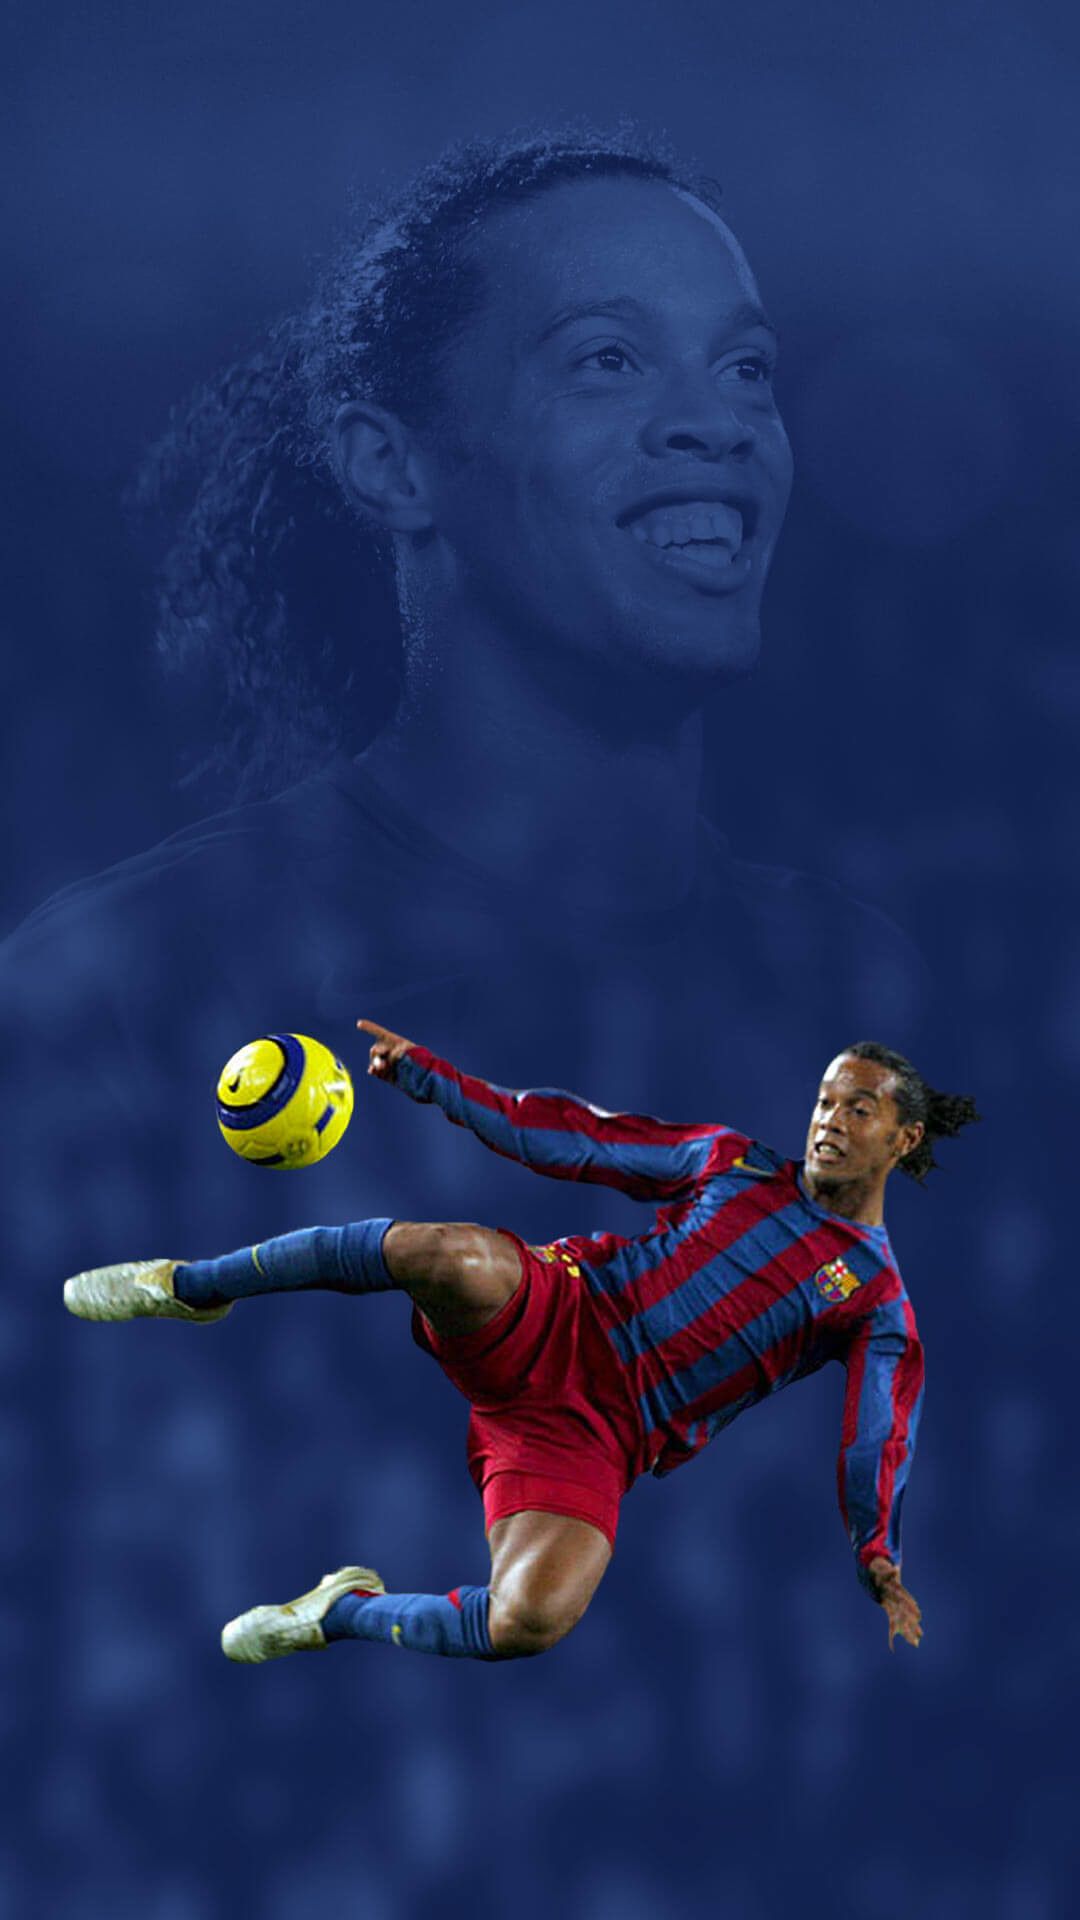 Hd Wallpapers Picture Blogging Wallpaper Ronaldinho Blog Wallpaper Wallpaper   फट शयर